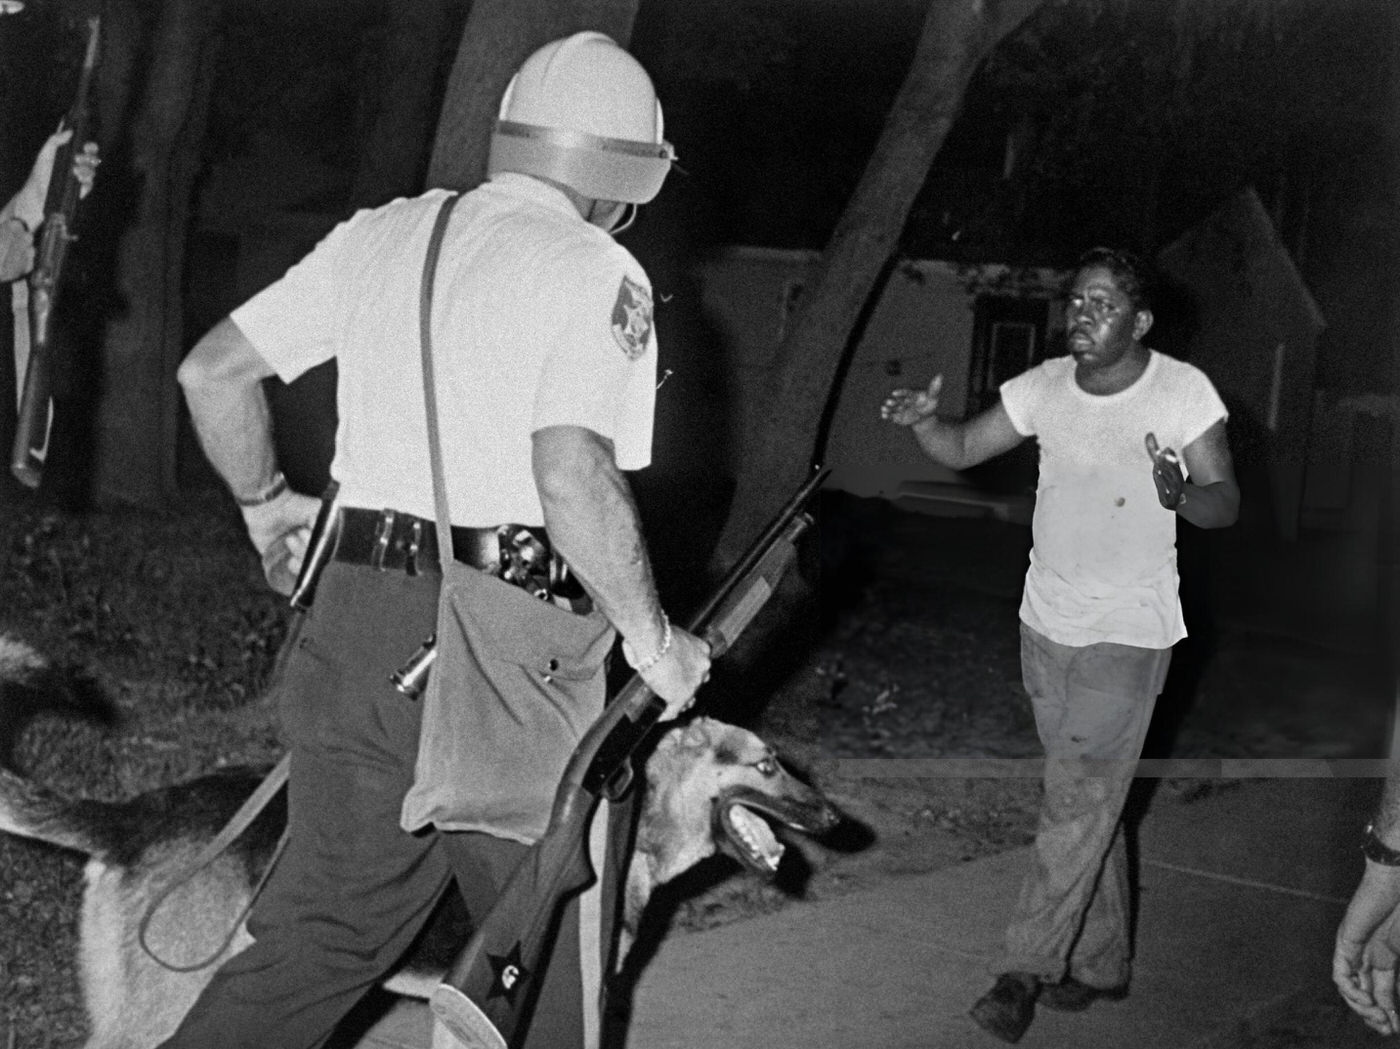 Helmeted police riot argue with an African american man as Newark witnessed its second night of rioting, 1960s.